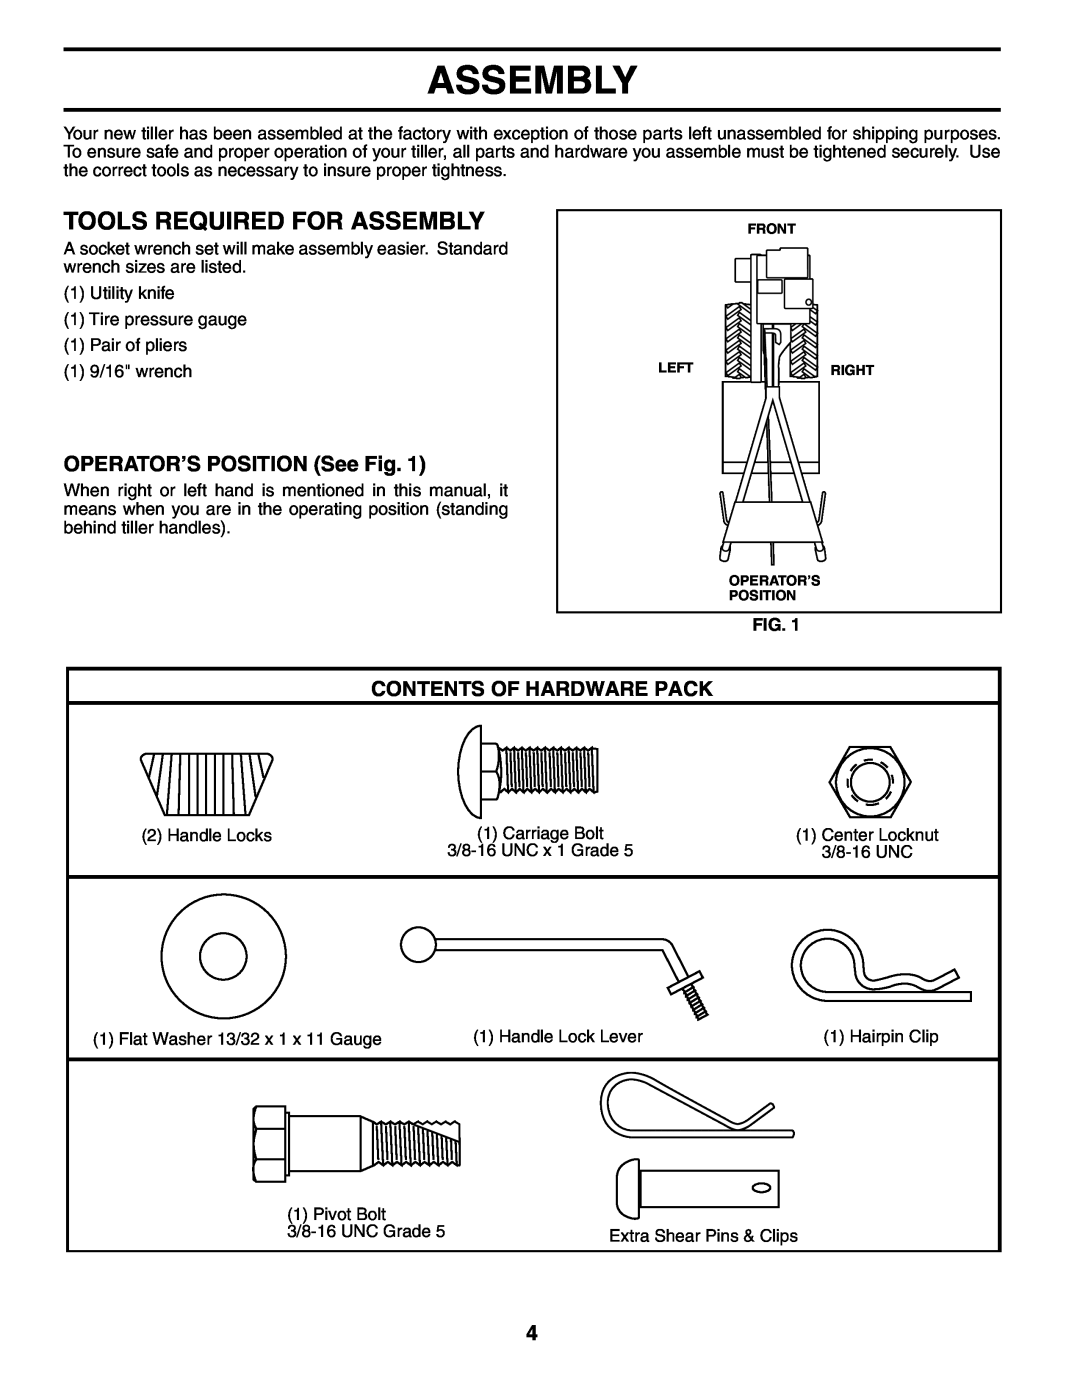 Poulan HDR500L owner manual Tools Required For Assembly, OPERATOR’S POSITION See Fig, Contents Of Hardware Pack 